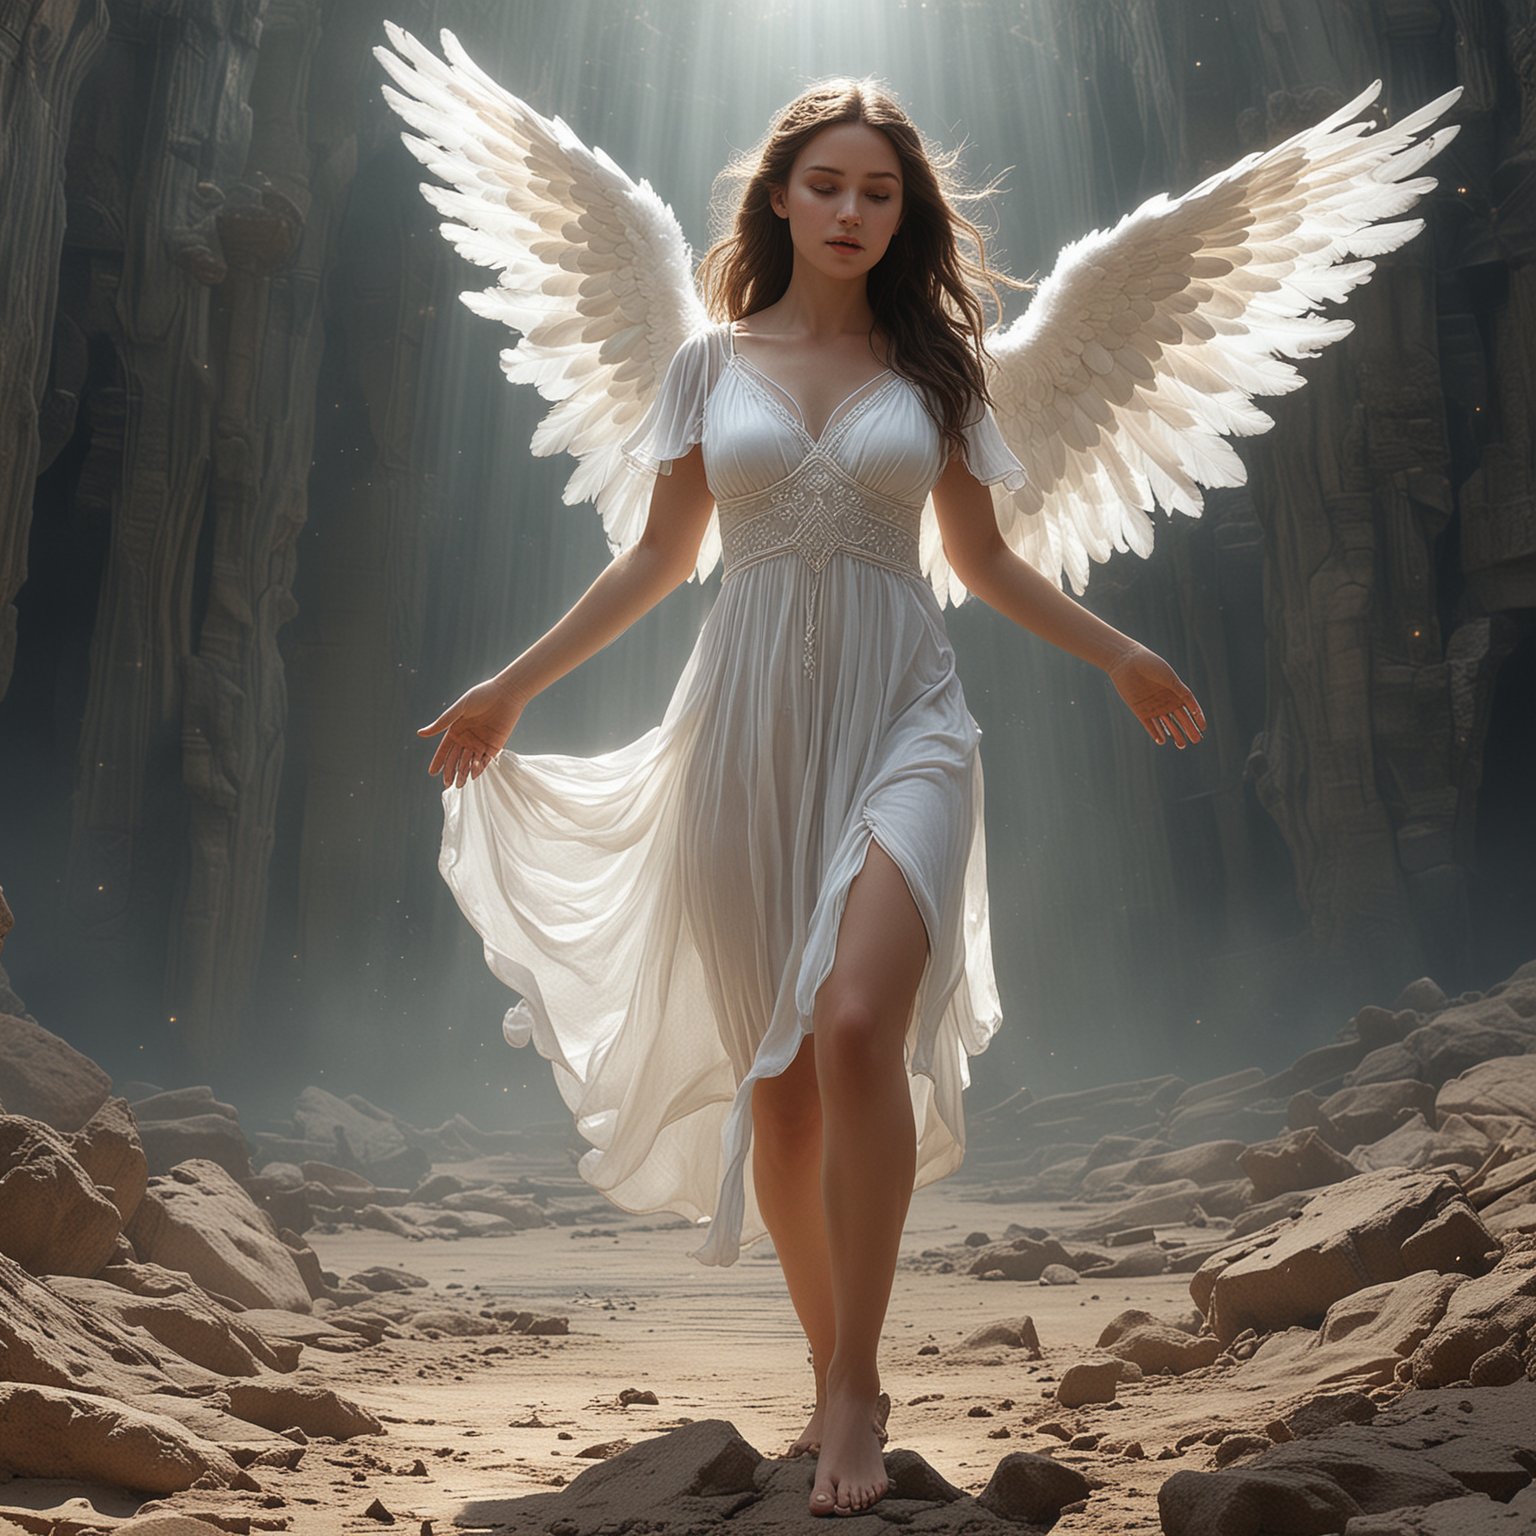 Ethereal Guardian Angel in Mysterious Otherworldly Setting